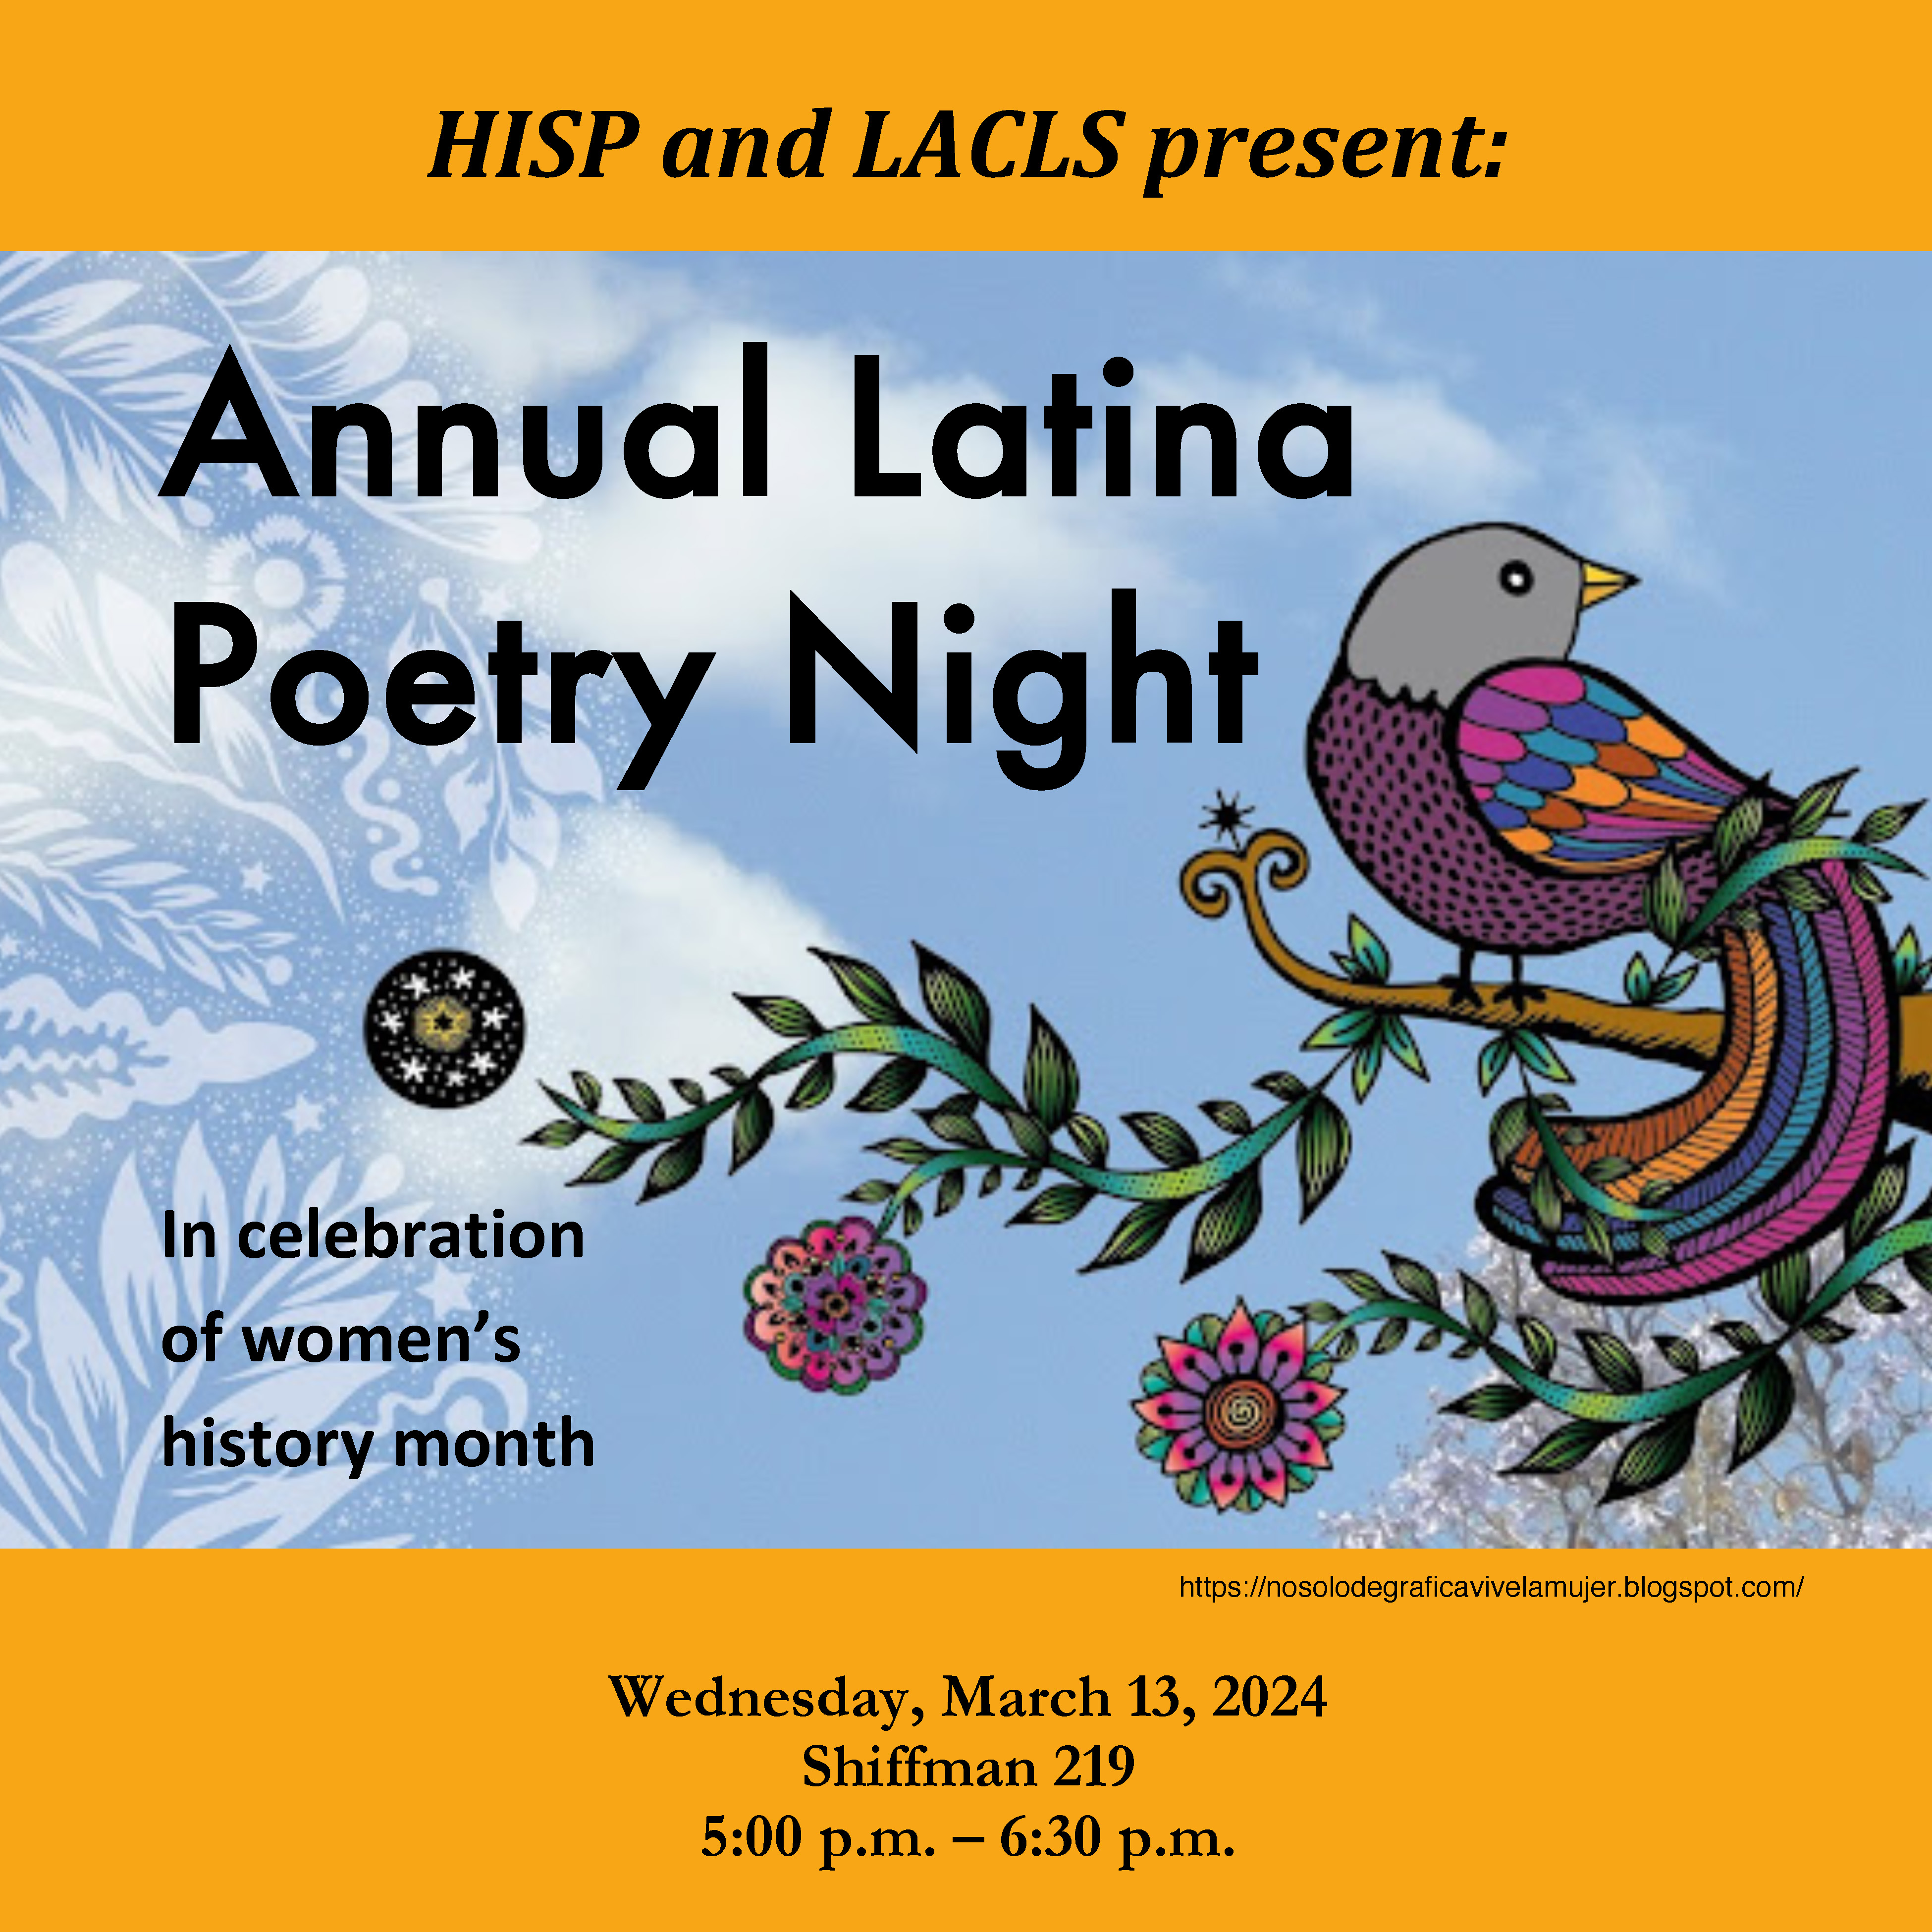 flyer for Latina Poetry Night with illustration of colorful bird in a tree. text is same as on this page.